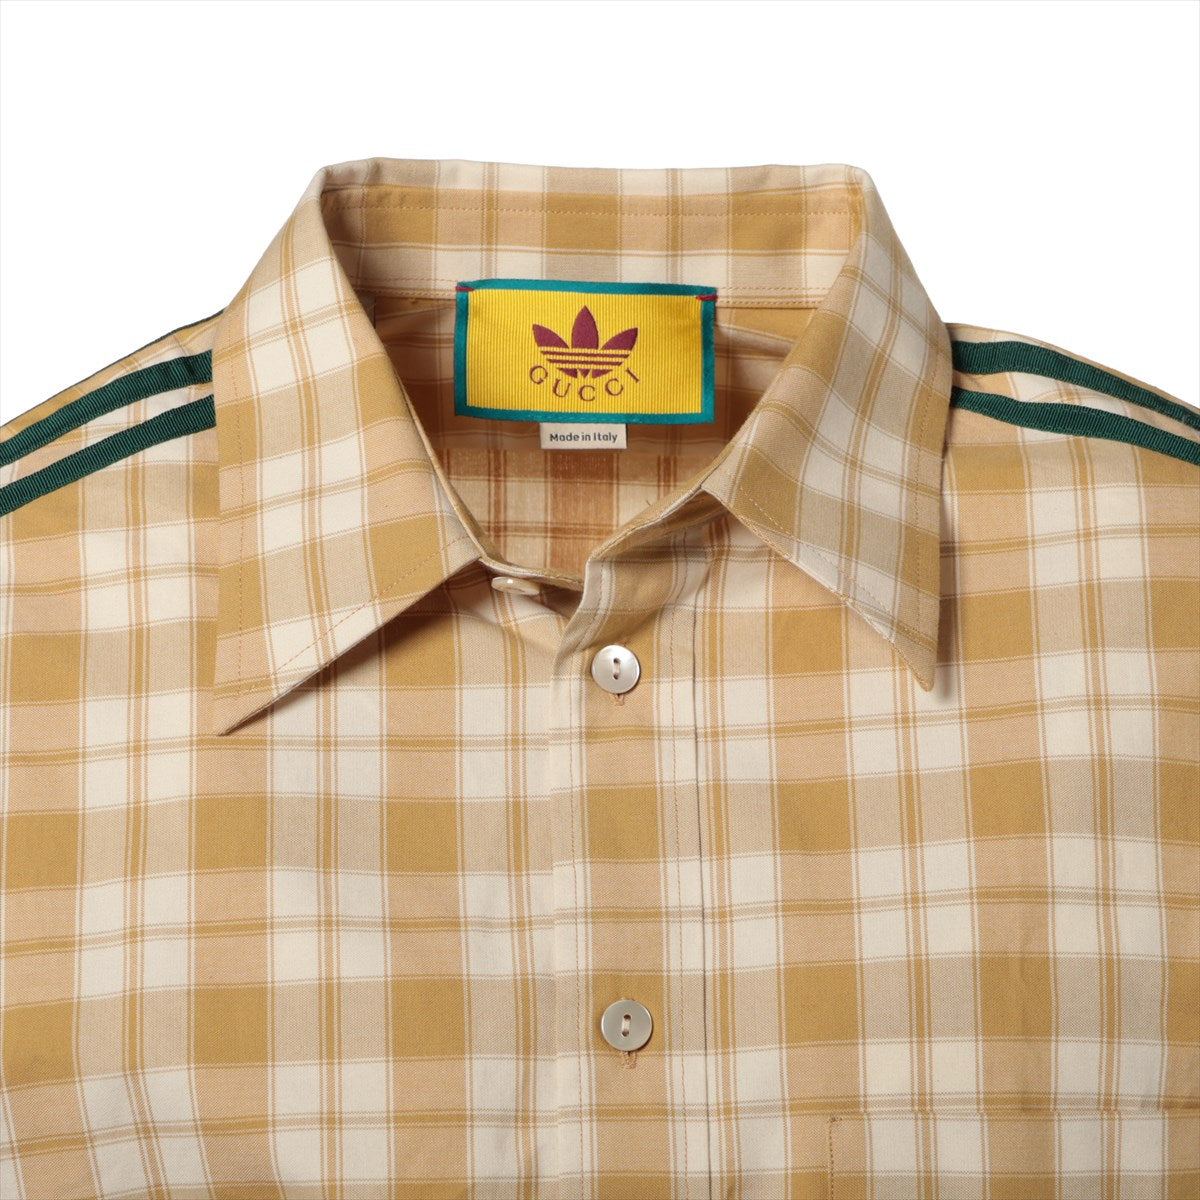 Gucci x adidas Cotton & Polyester Checked shirt 41 Men's Green x beige  726087 sleeve line